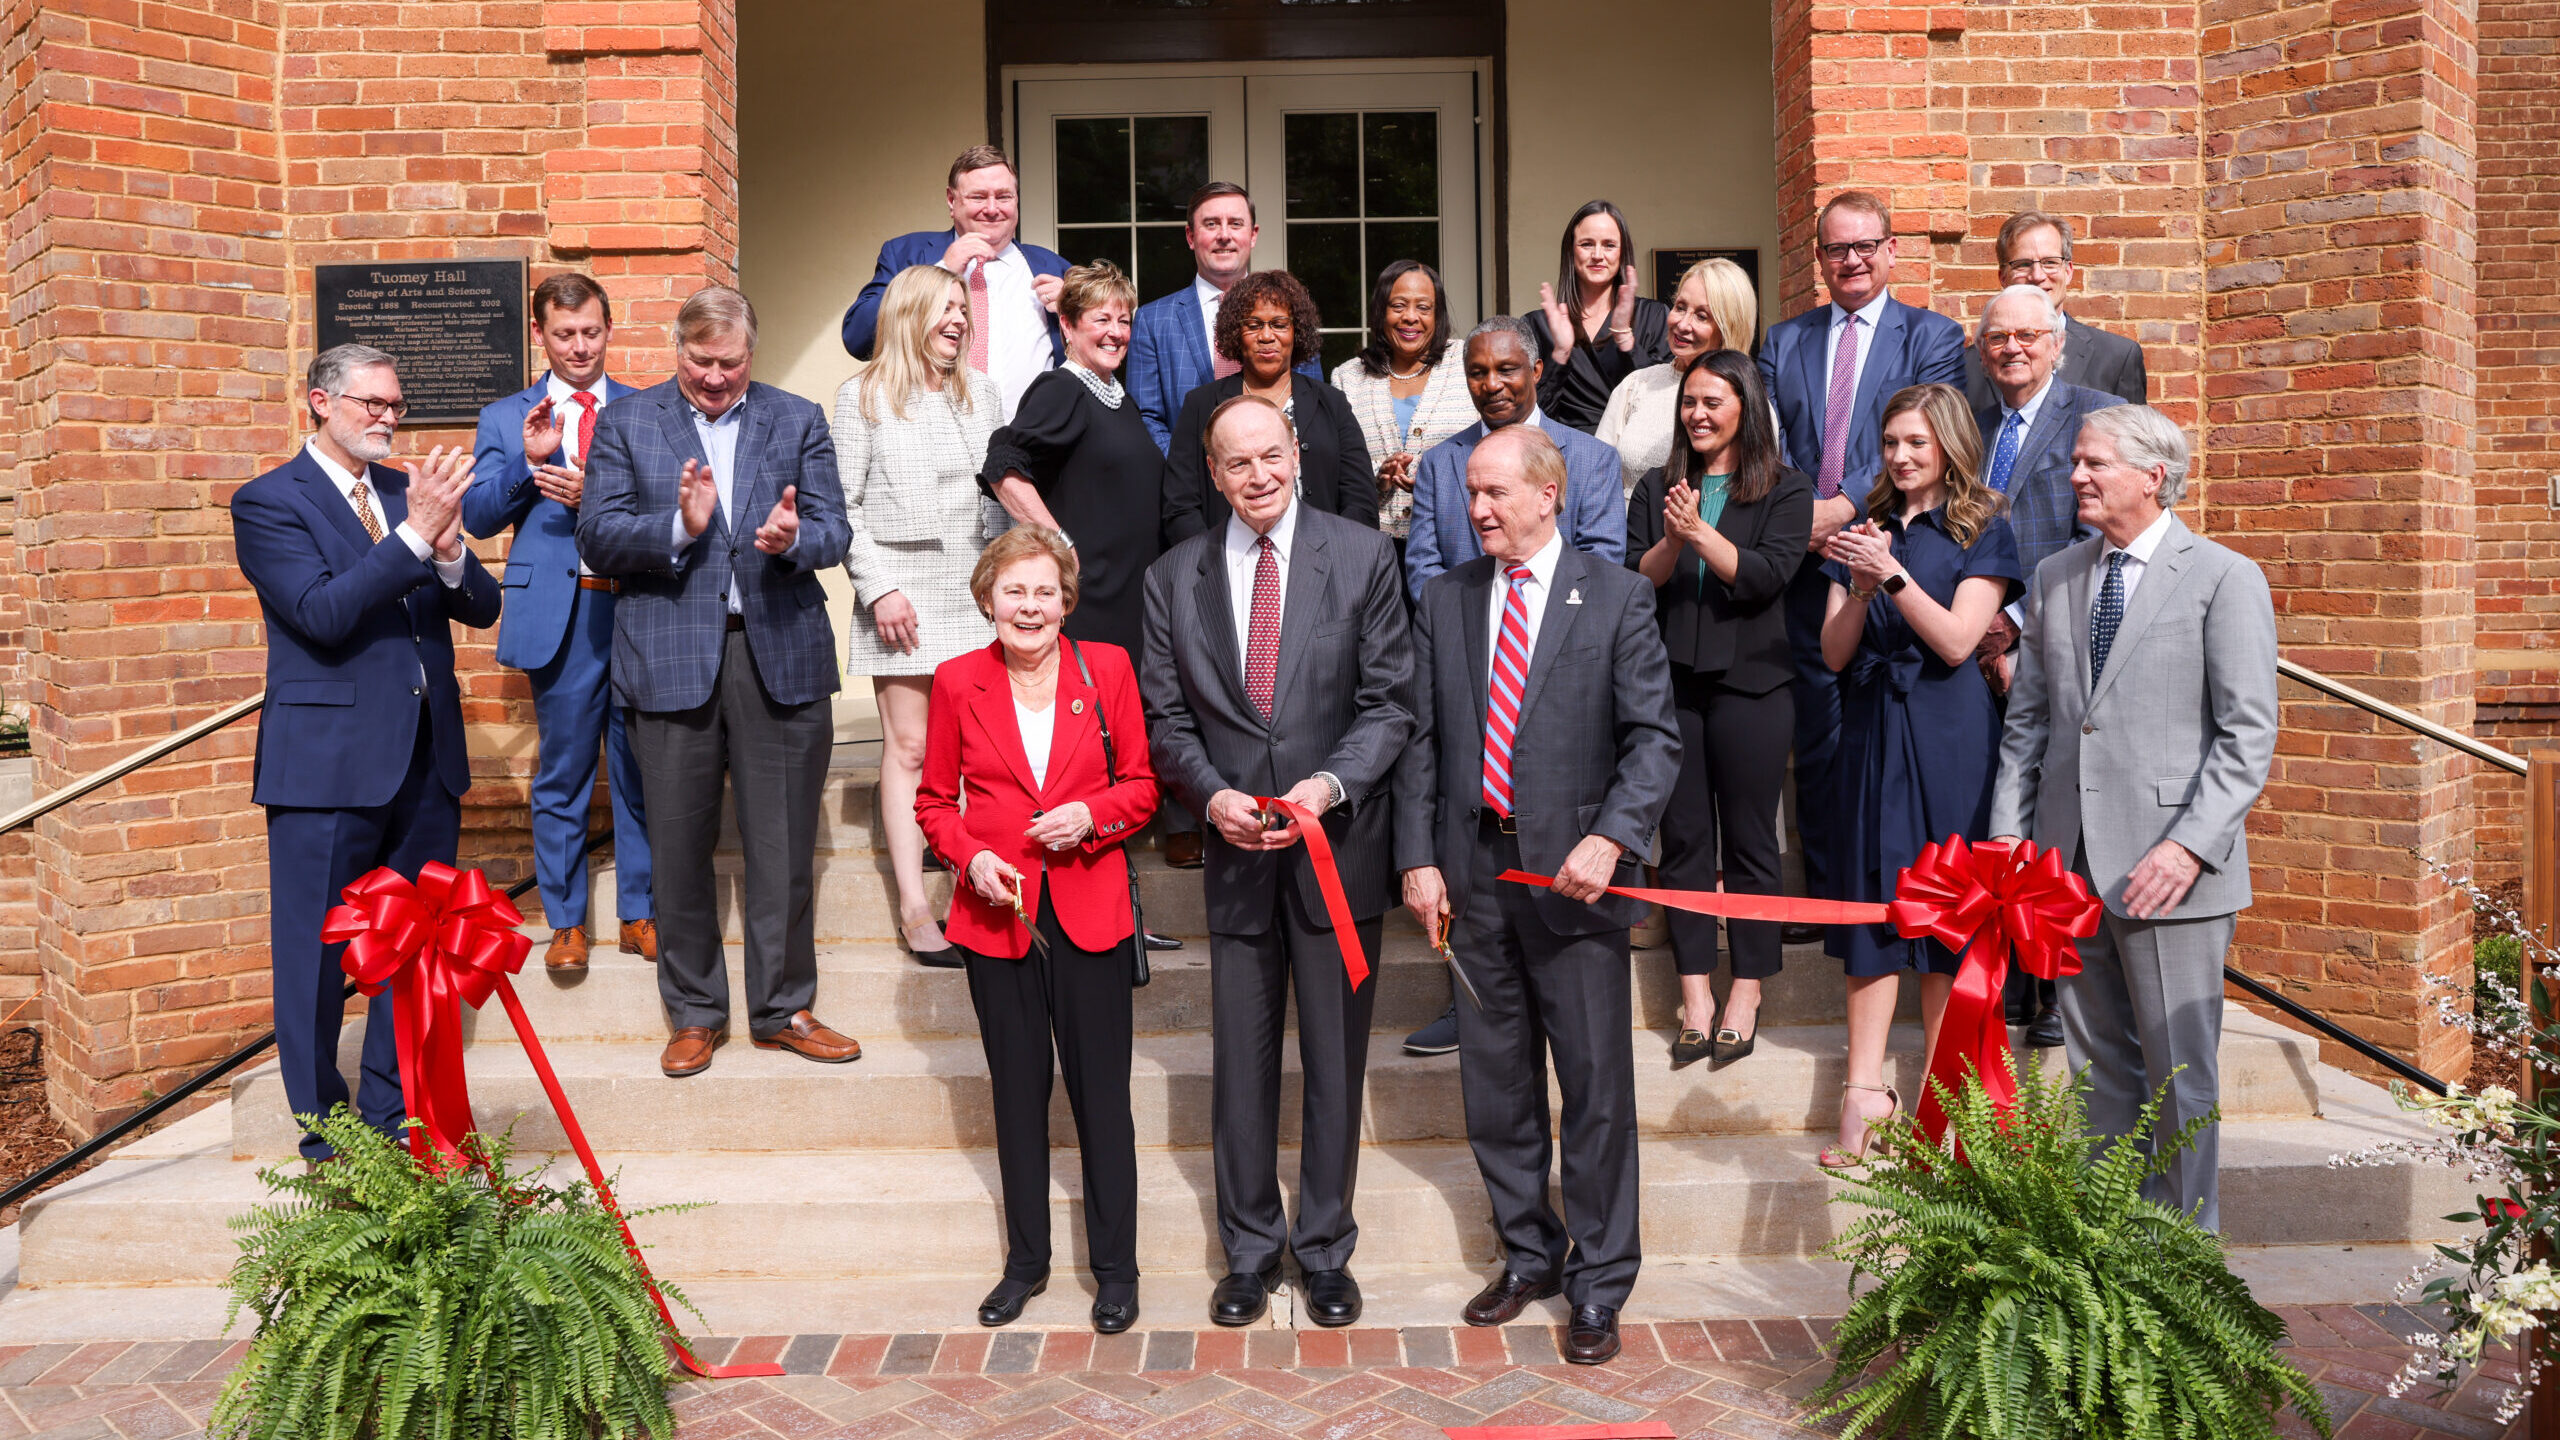 Senator and Dr. Shelby, President Bell and group of people cuts a ribbon outside Tuomey Hall, the new home of the Shelby Institute